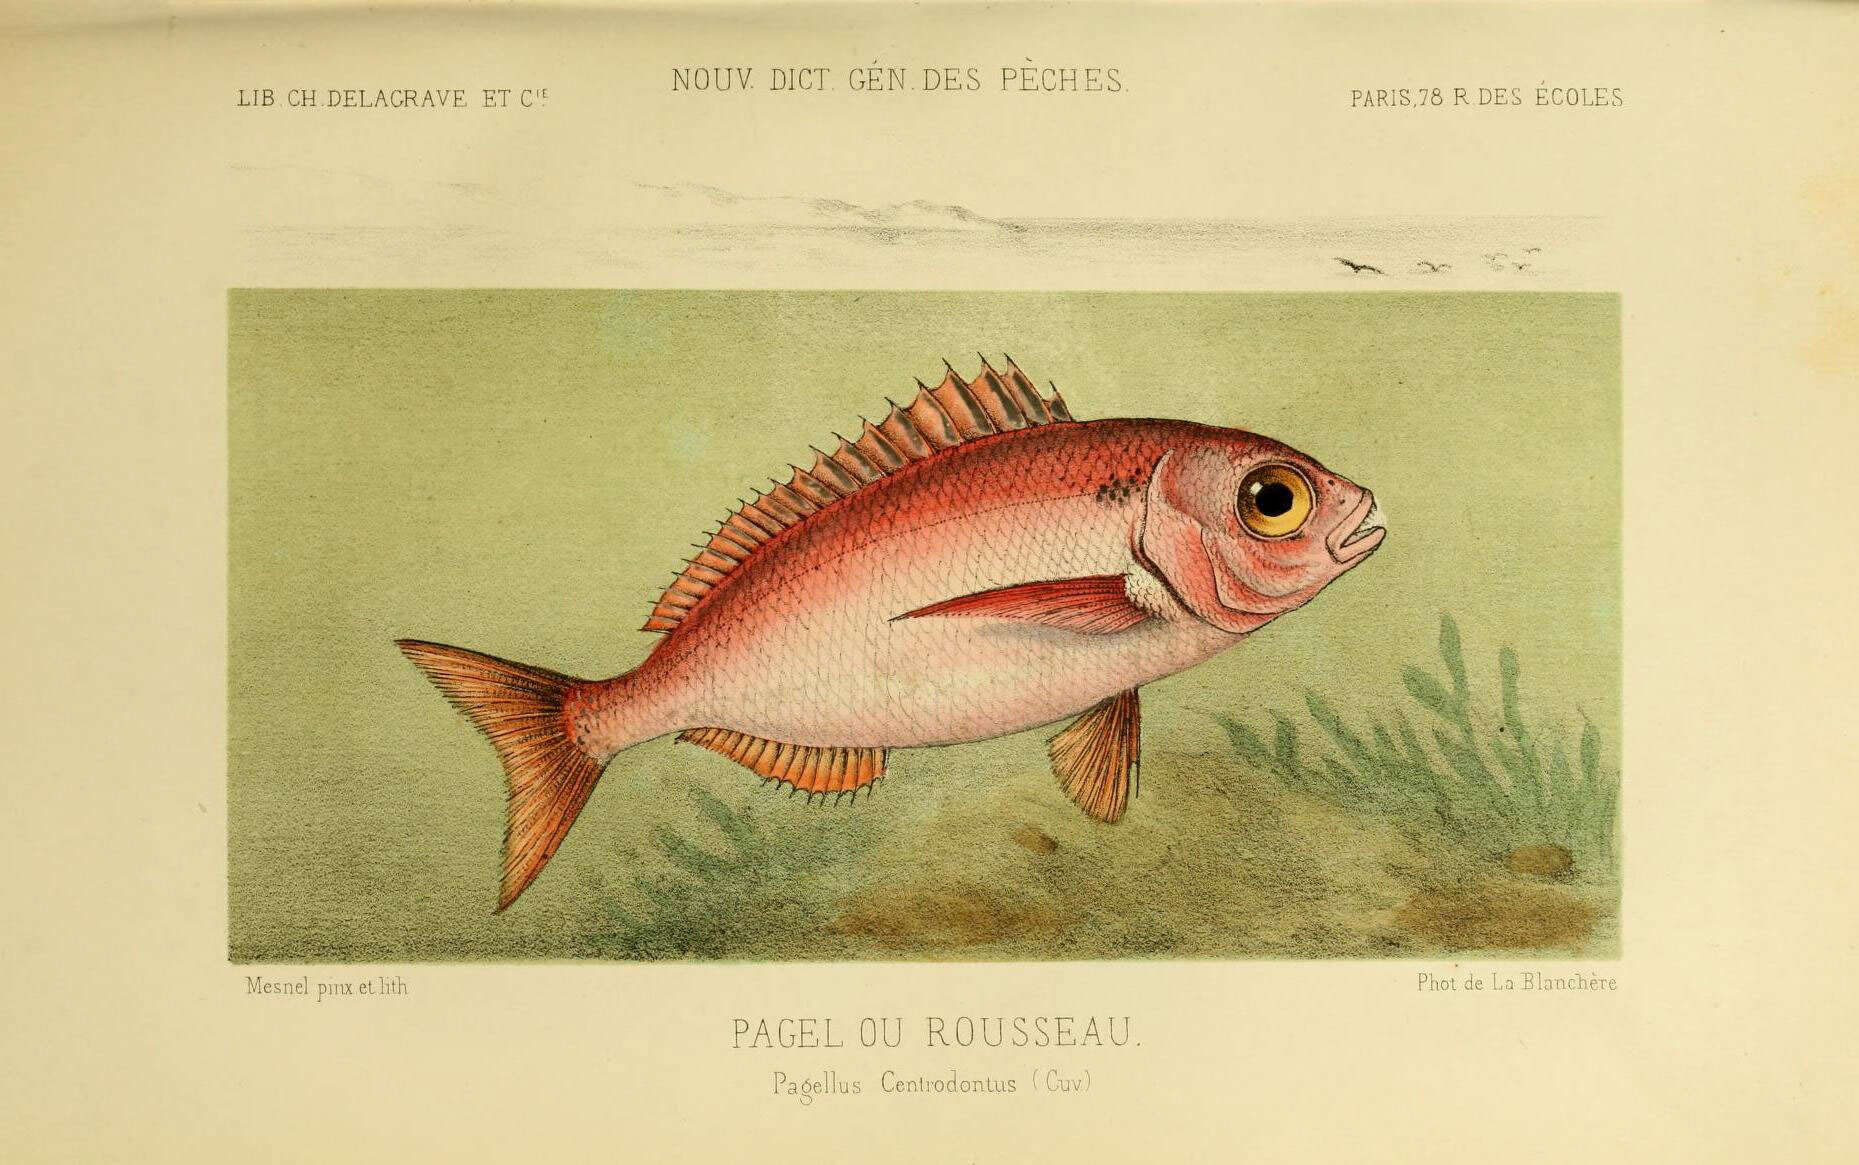 Image of Pagellus